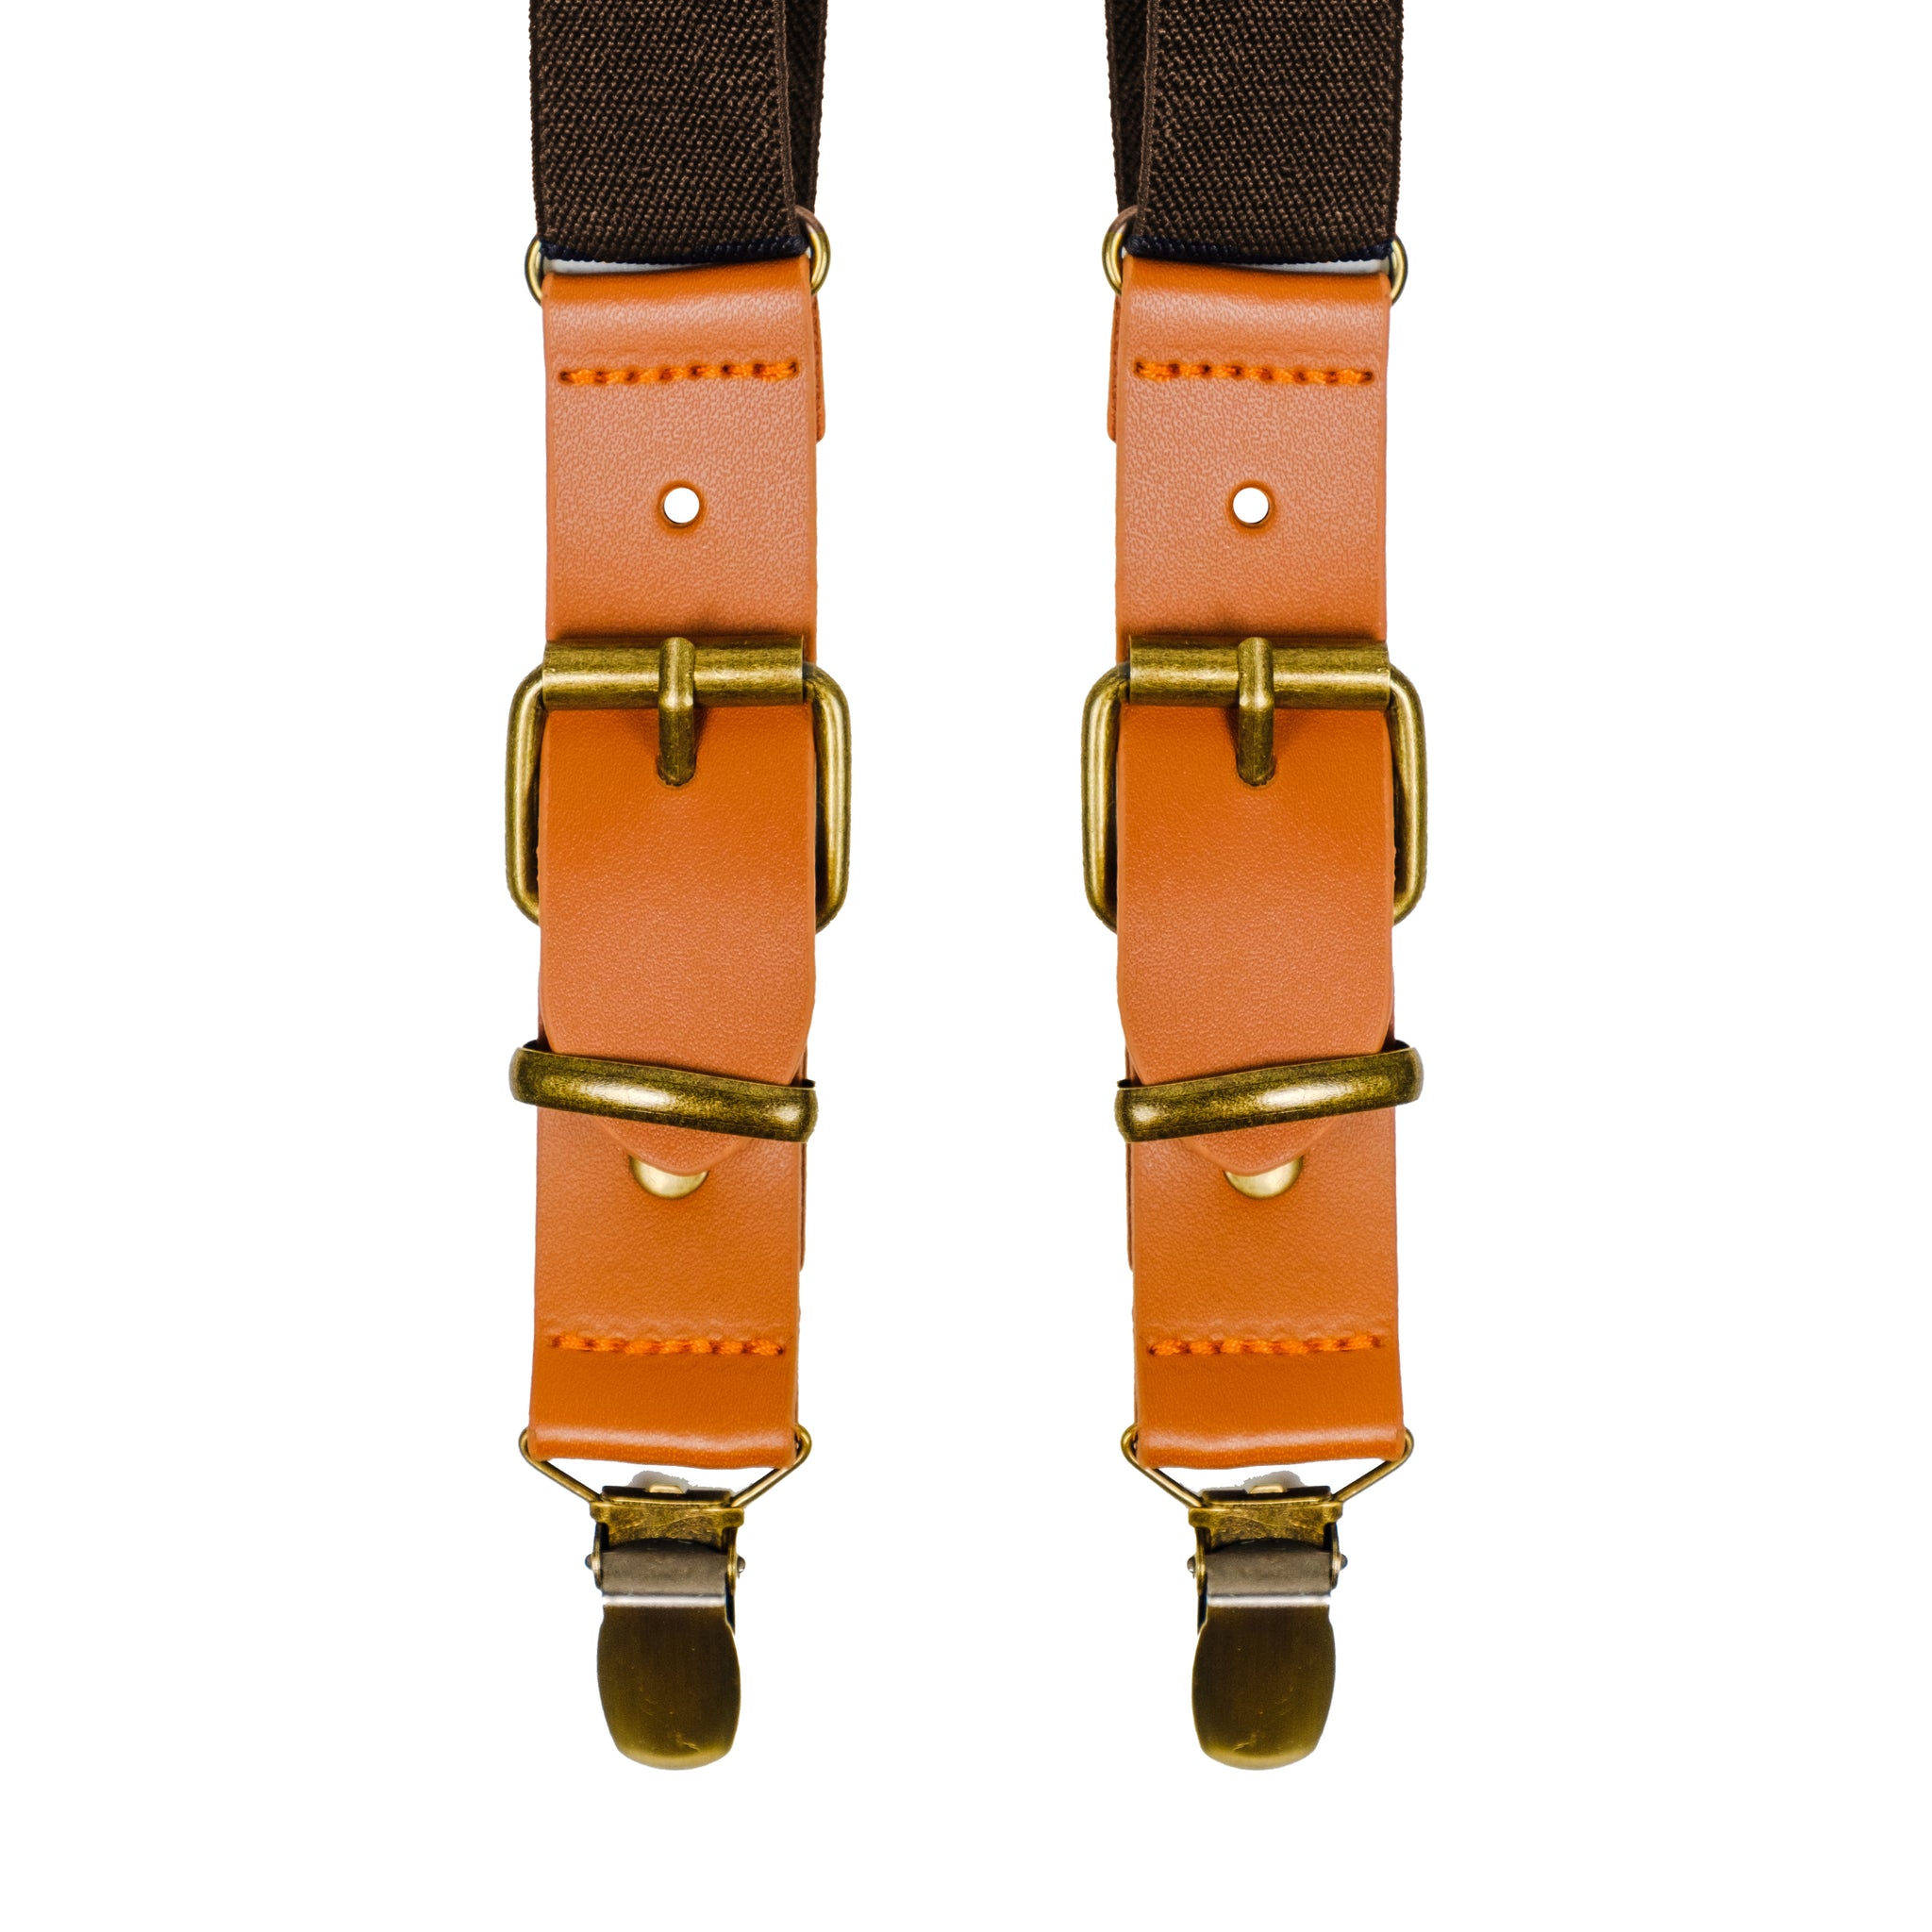 Chokore Y-shaped Suspenders with Leather detailing and adjustable Elastic Strap (Chocolate Brown)